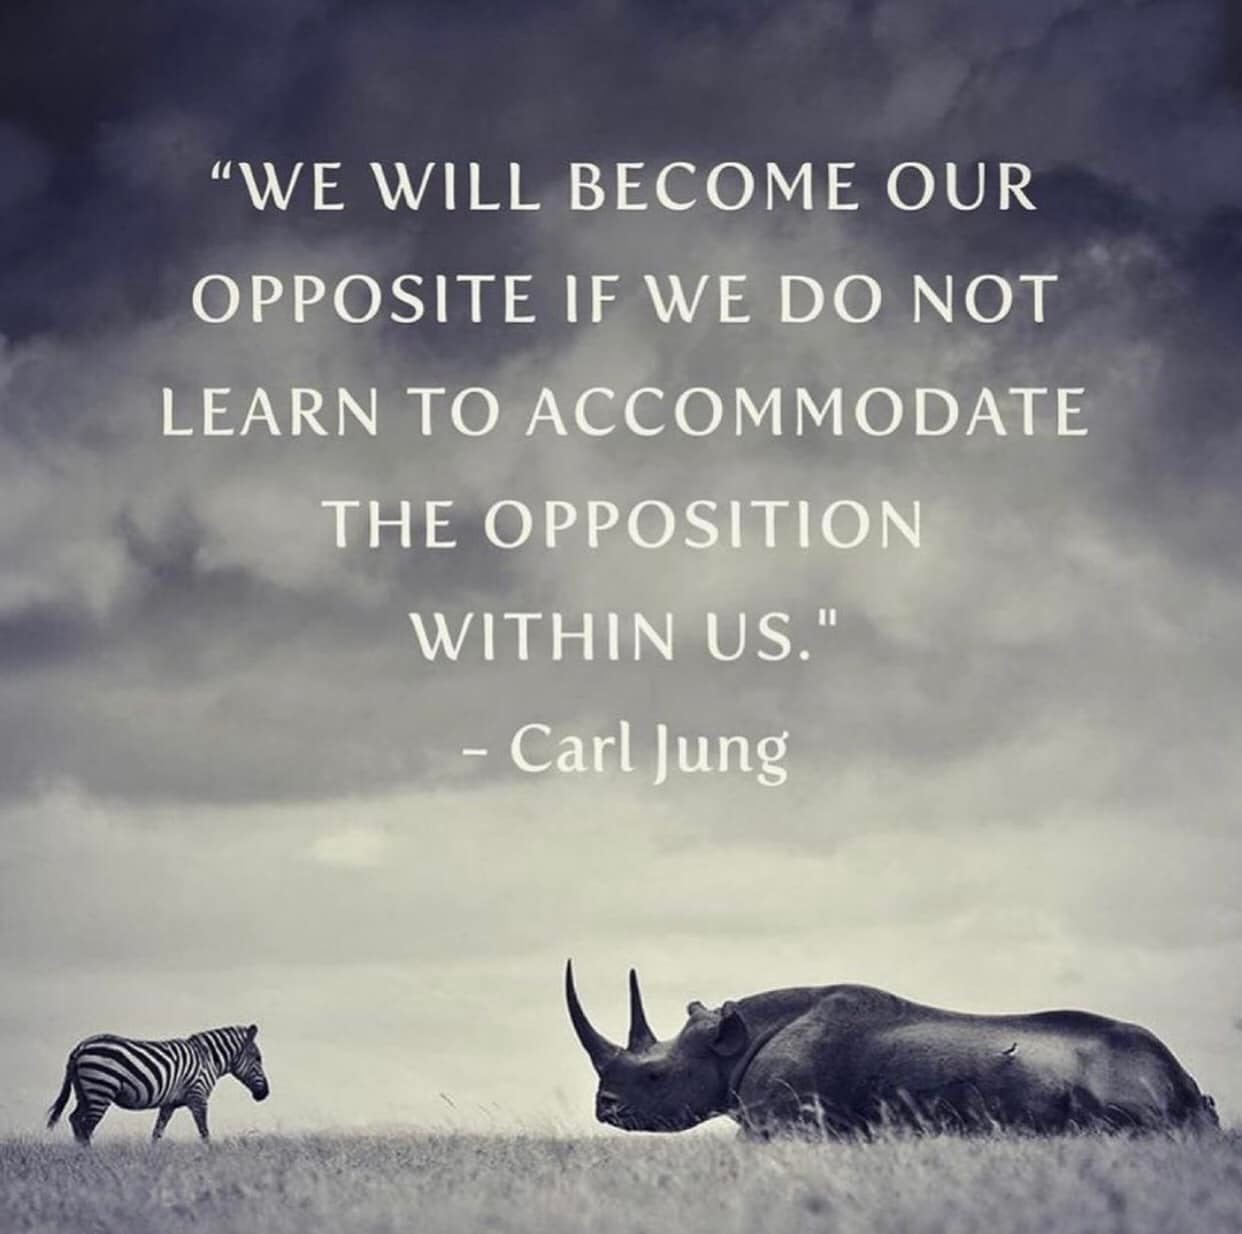 We will become our opposite if we do not learn to accommodate the opposition within us. ~ C. G. Jung